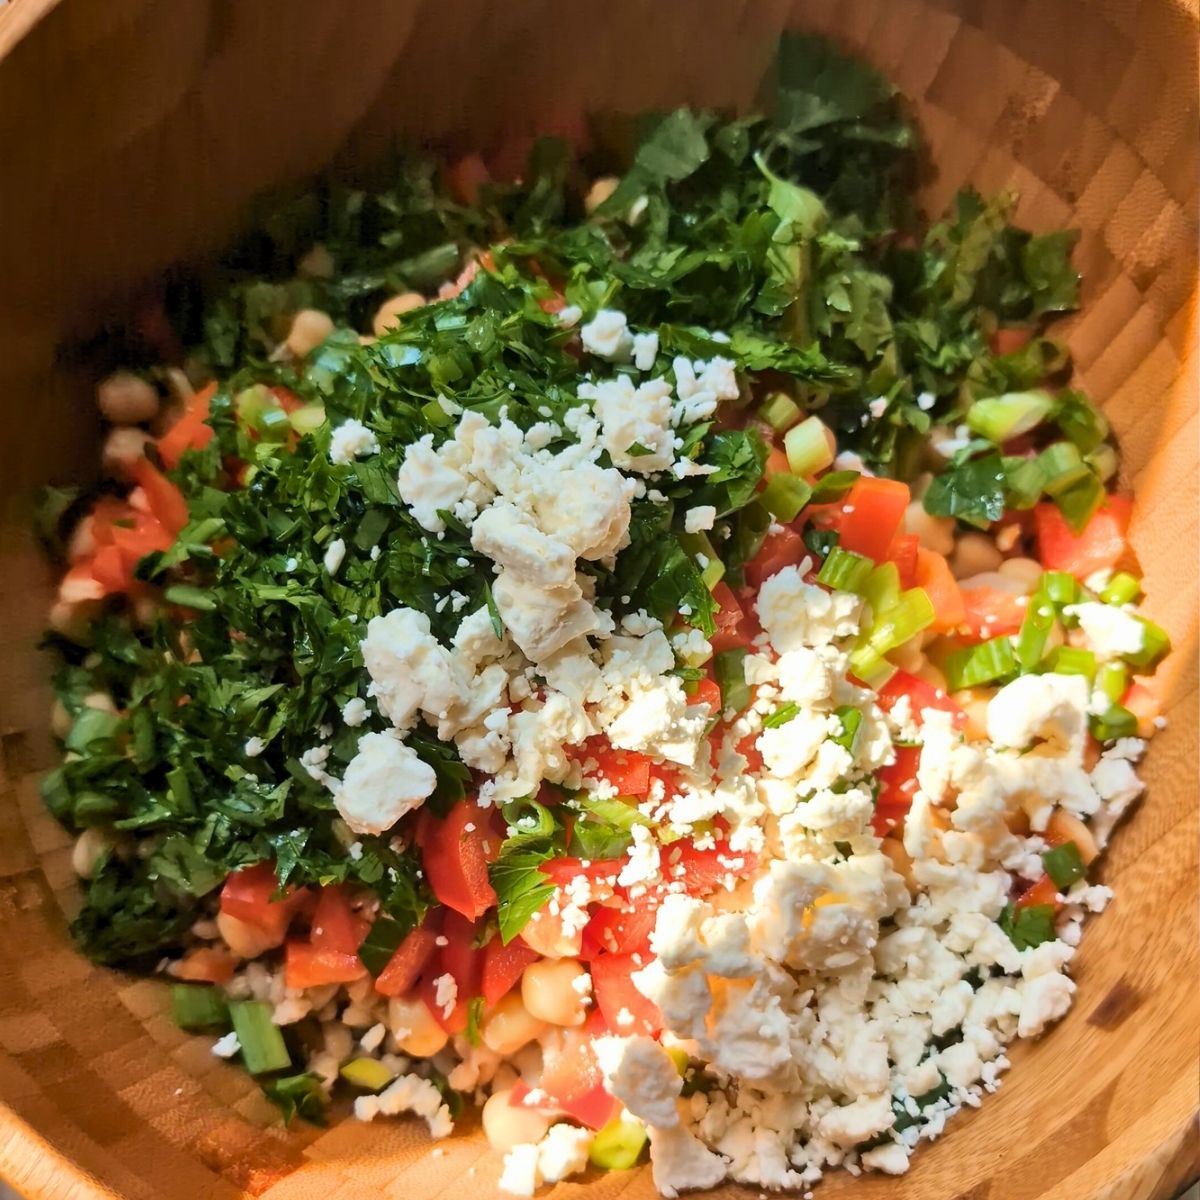 a large wooden bowl full of salad ingredients like beans, cooked barley, chopped vegetables, and feta cheese.